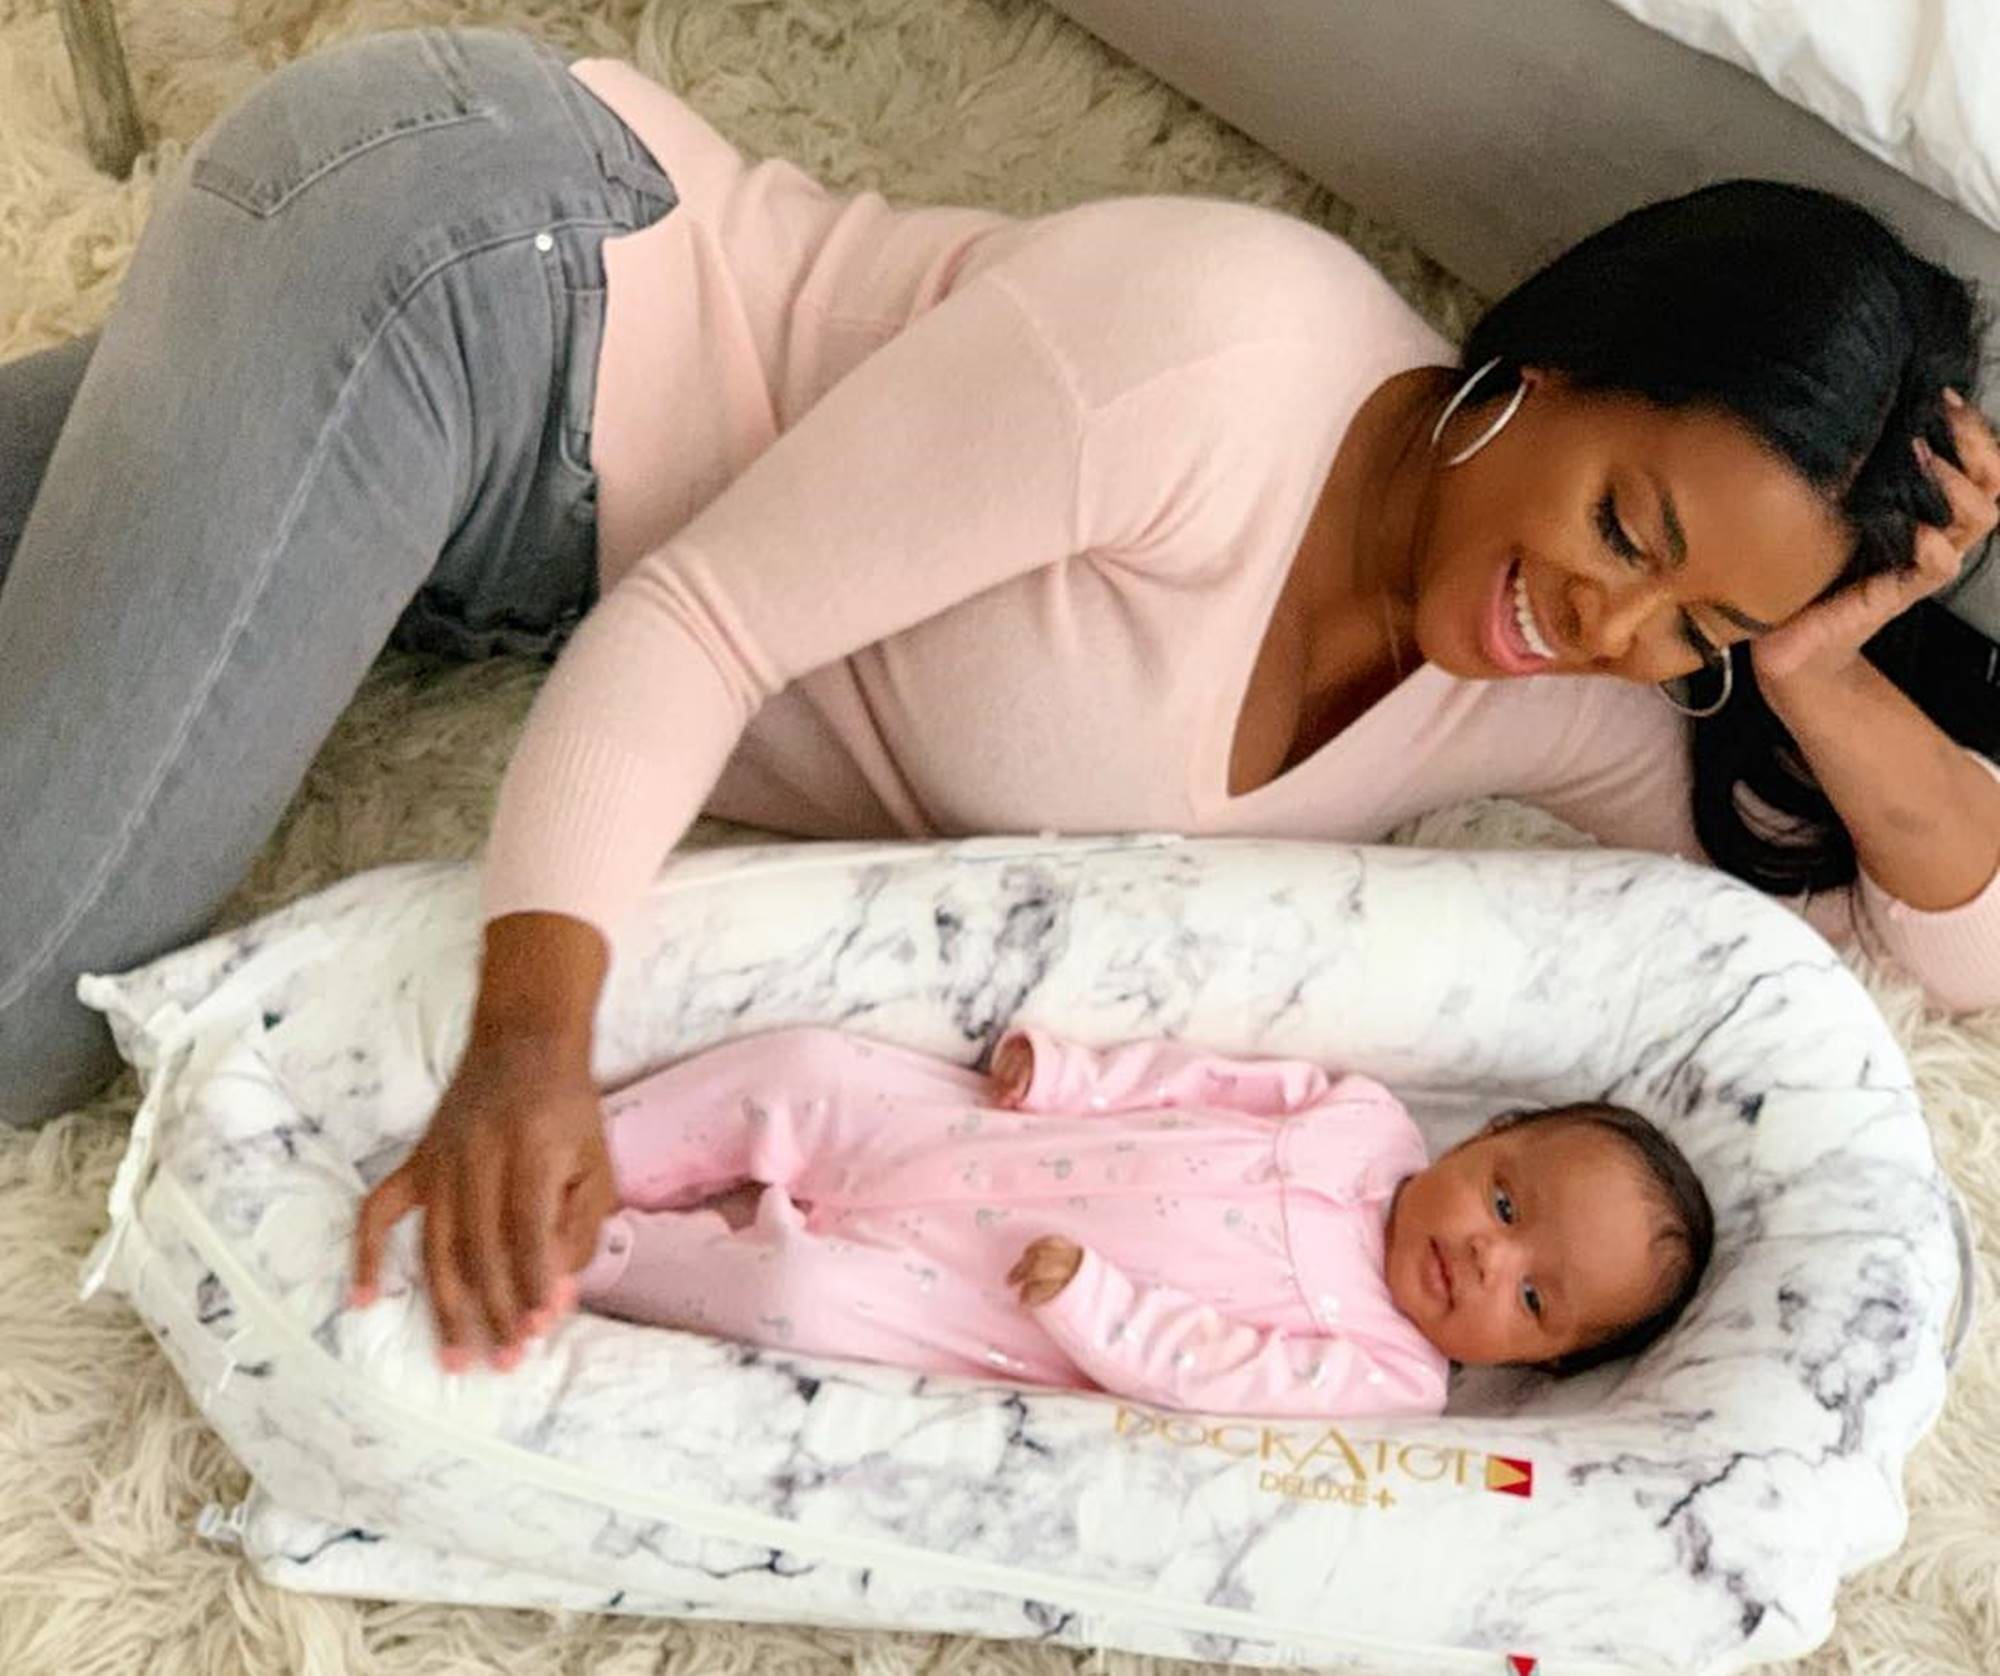 Kenya Moore Will Make Your Day With The Latest Photos Of Baby Brooklyn